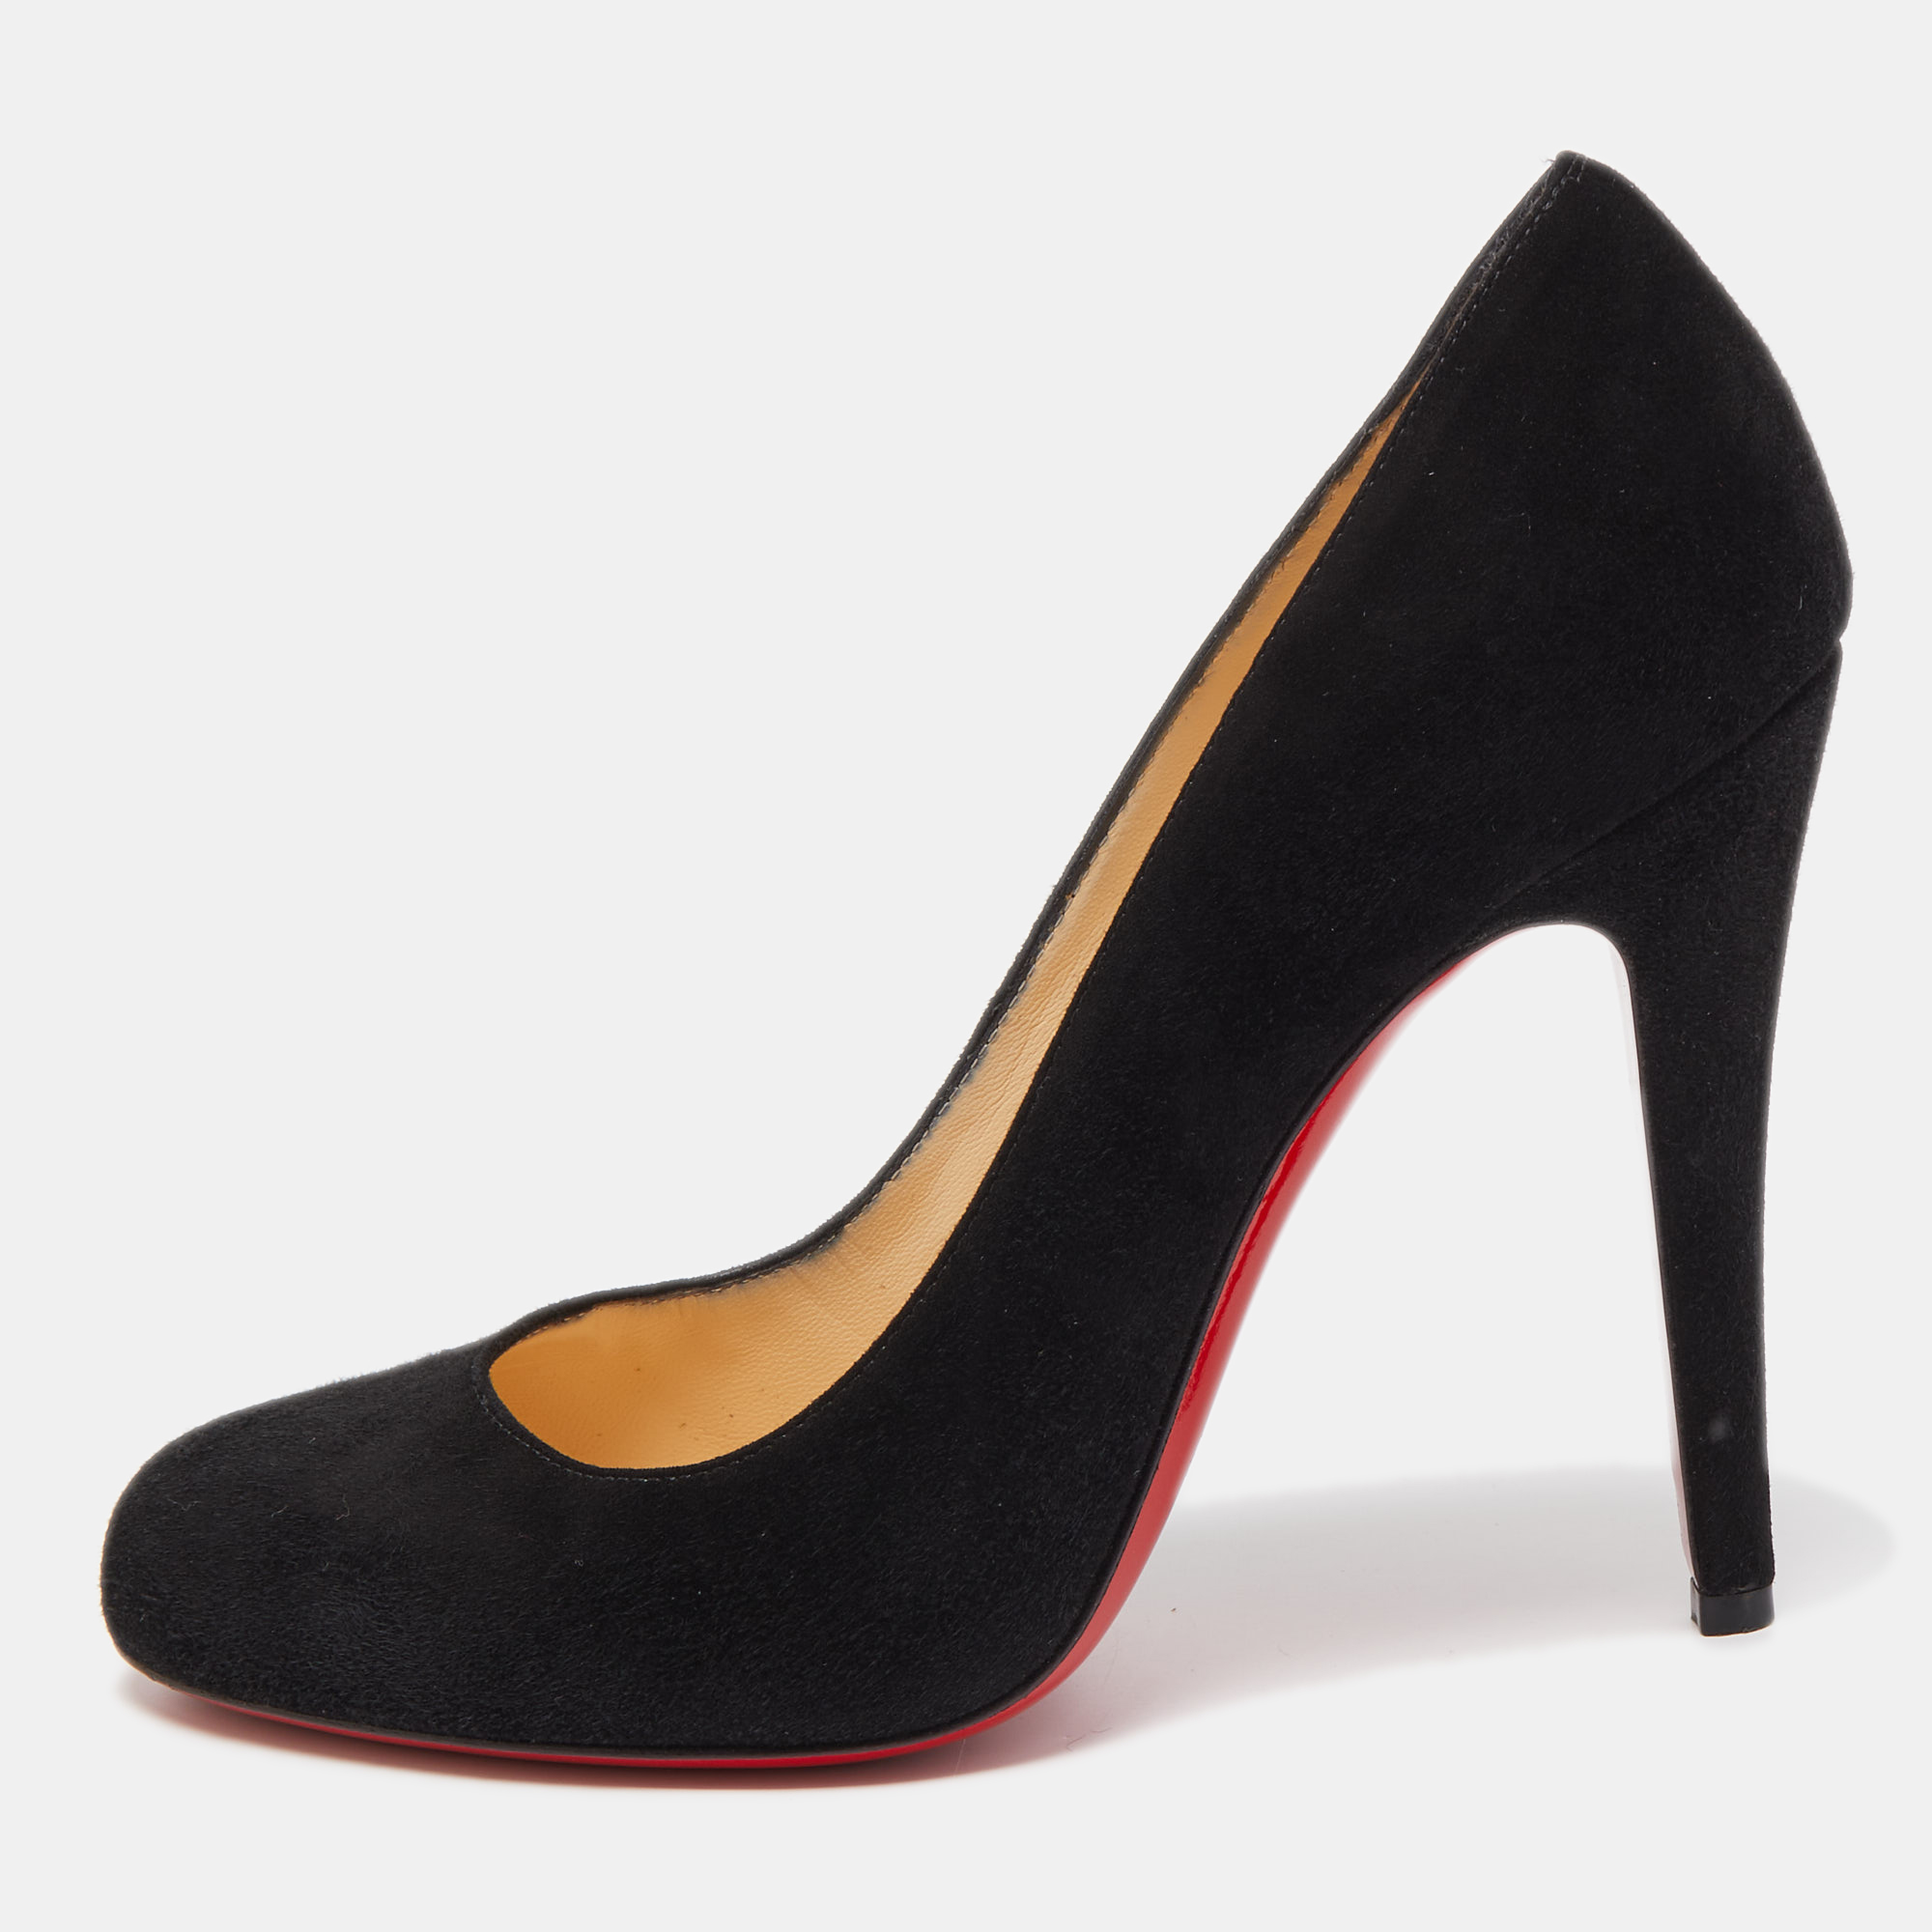 Pre-owned Christian Louboutin Black Suede Fifi Pumps Size 38